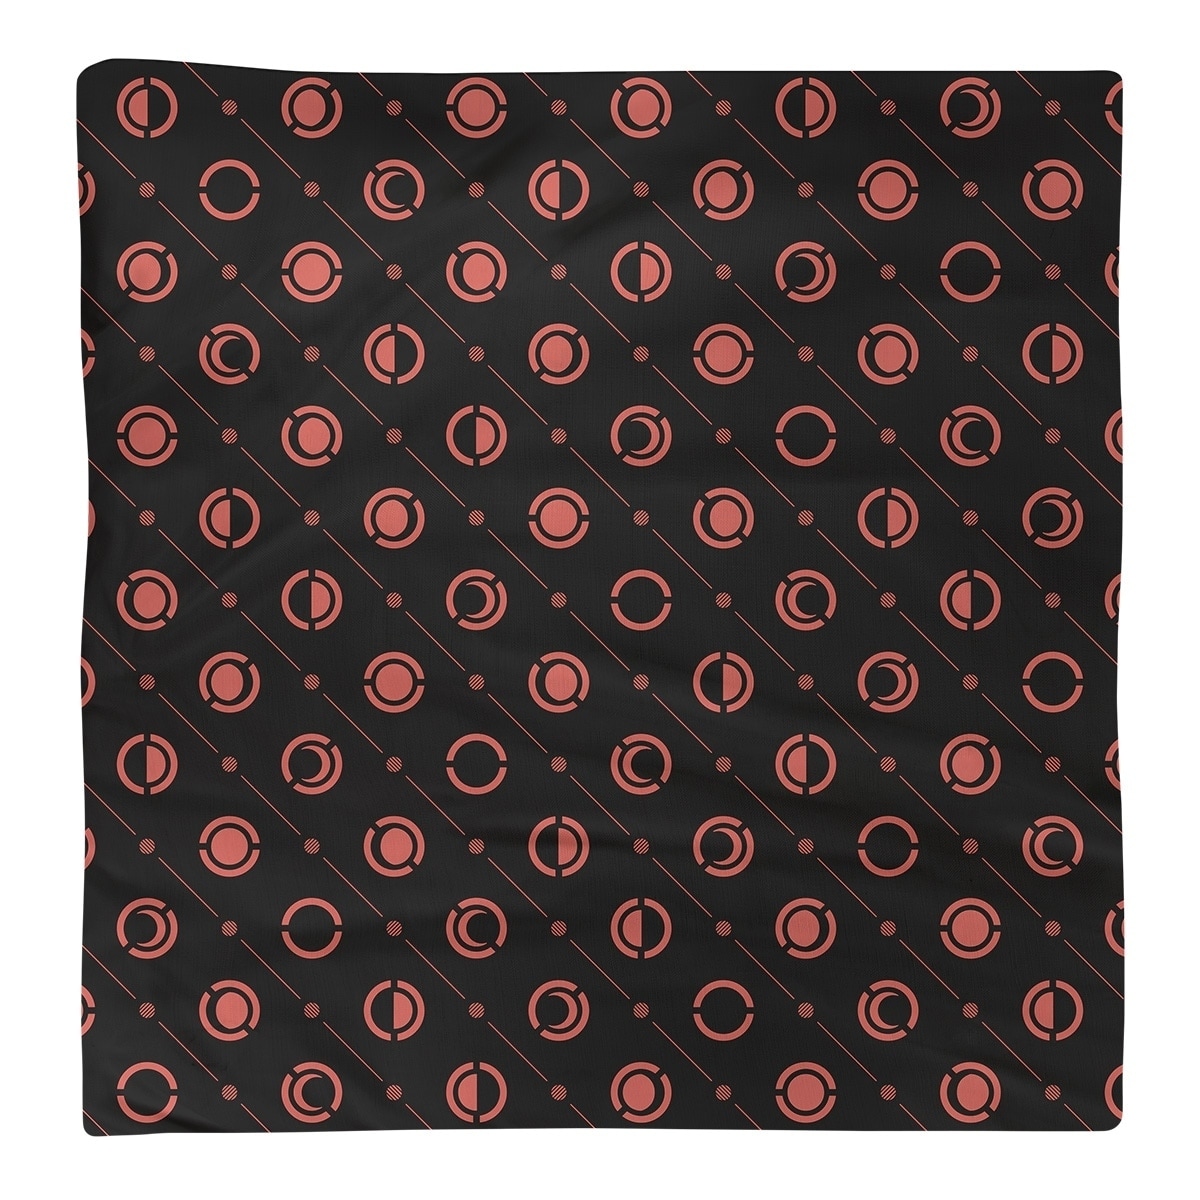 Black & Color Moon Phases Napkin